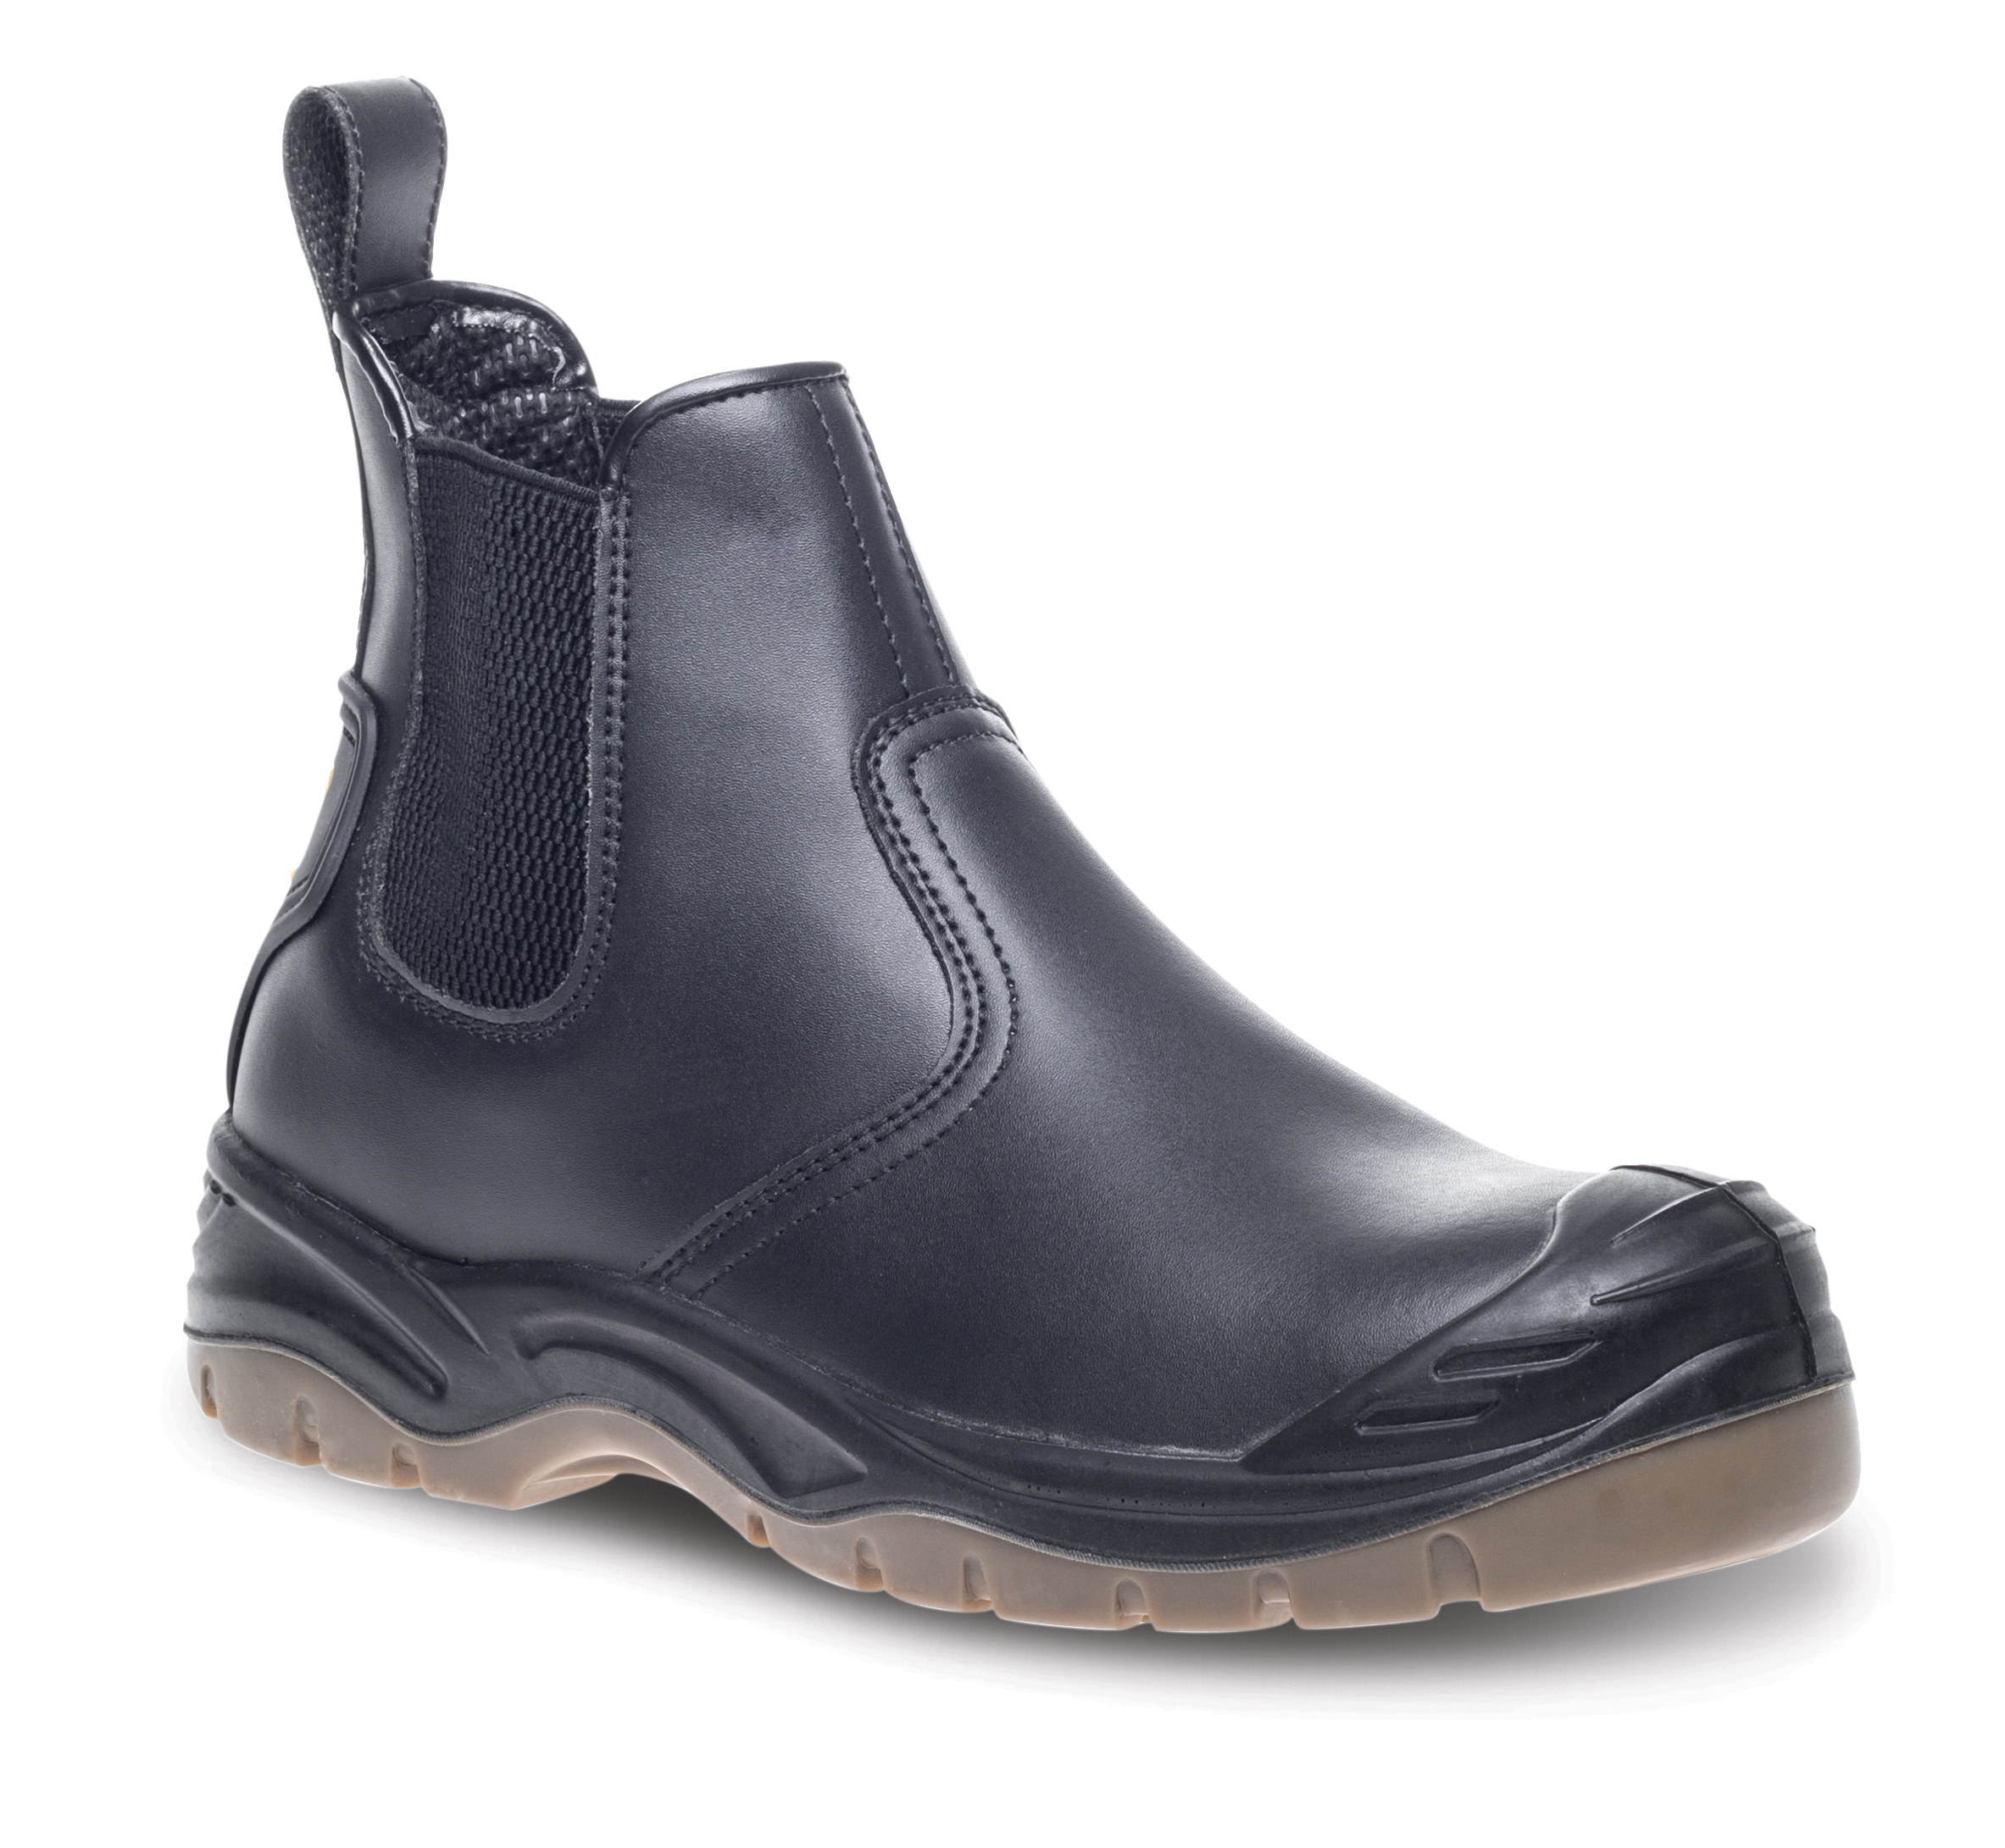 AP714SM - Apache Black Safety Dealer Boot - AAA Safety Supplies Limited